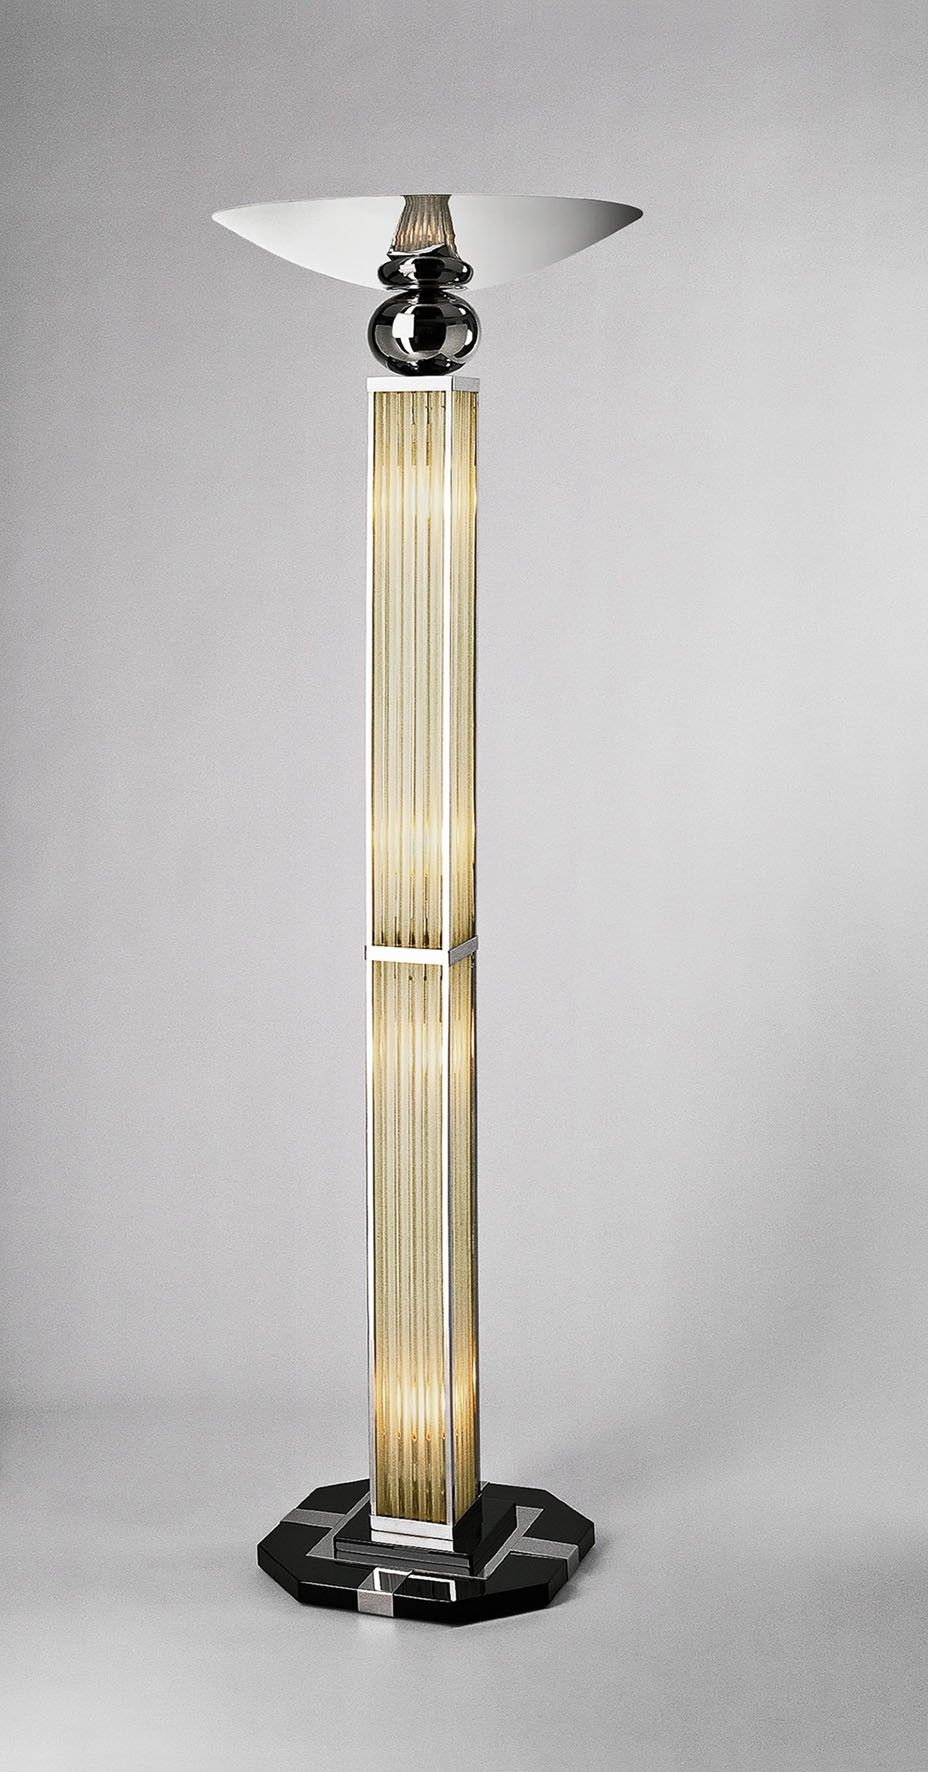 Beautiful Art Deco Style Floor Lamp Reminds Me Of The throughout dimensions 928 X 1772